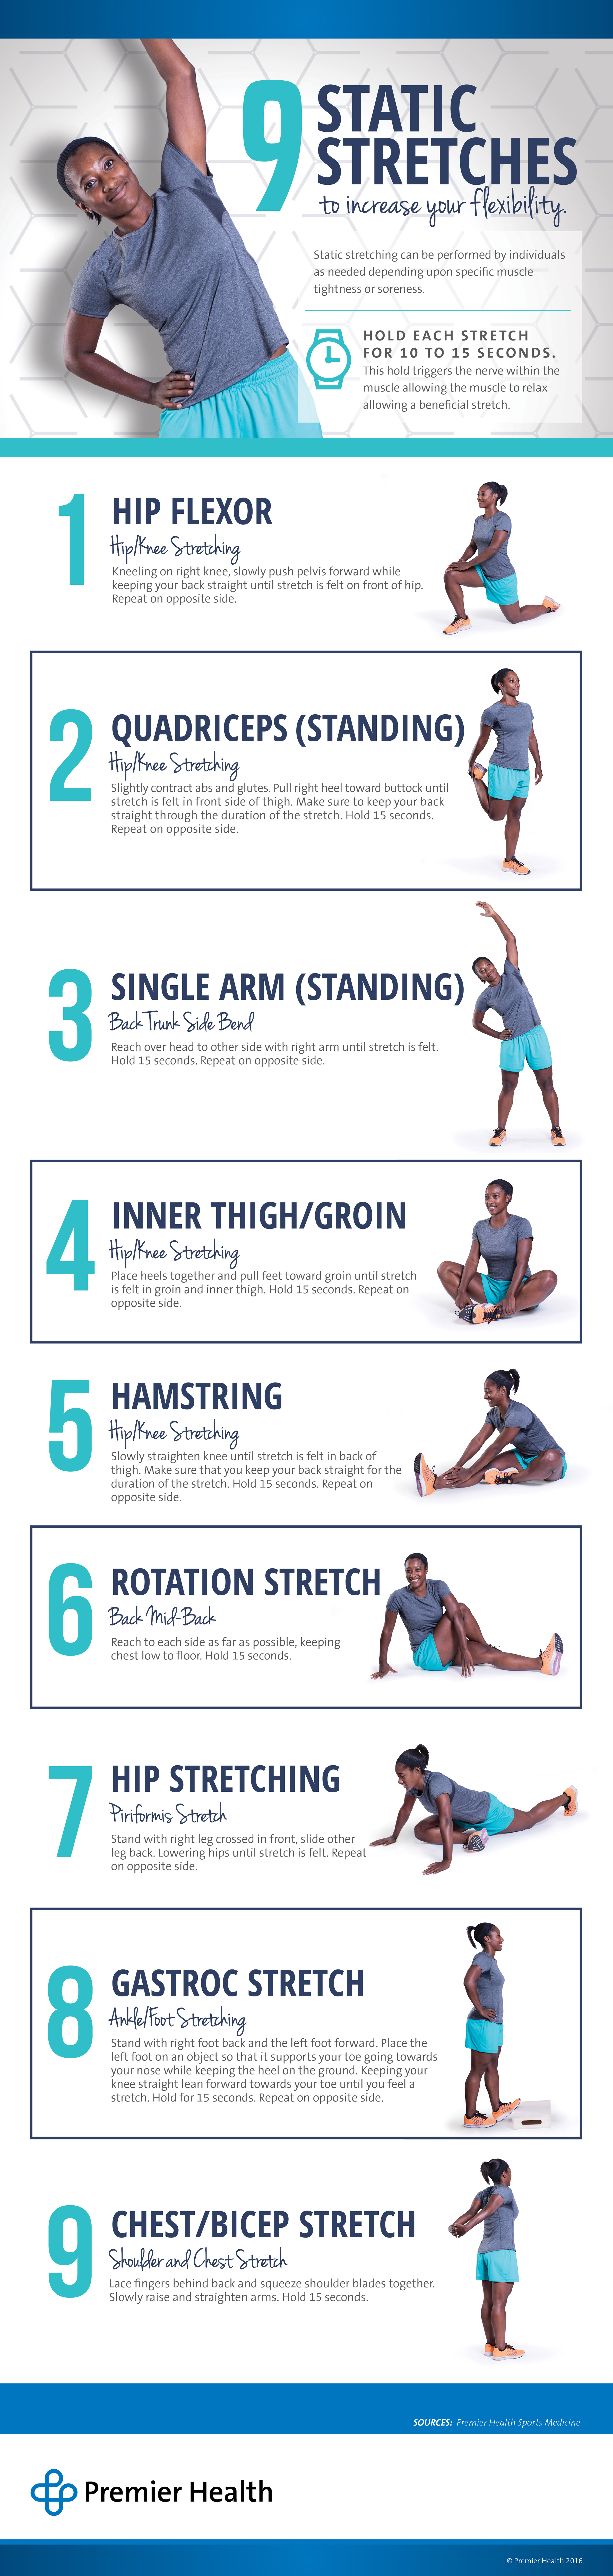 5 Thigh Stretches for Increased Flexibility and Better Mobility